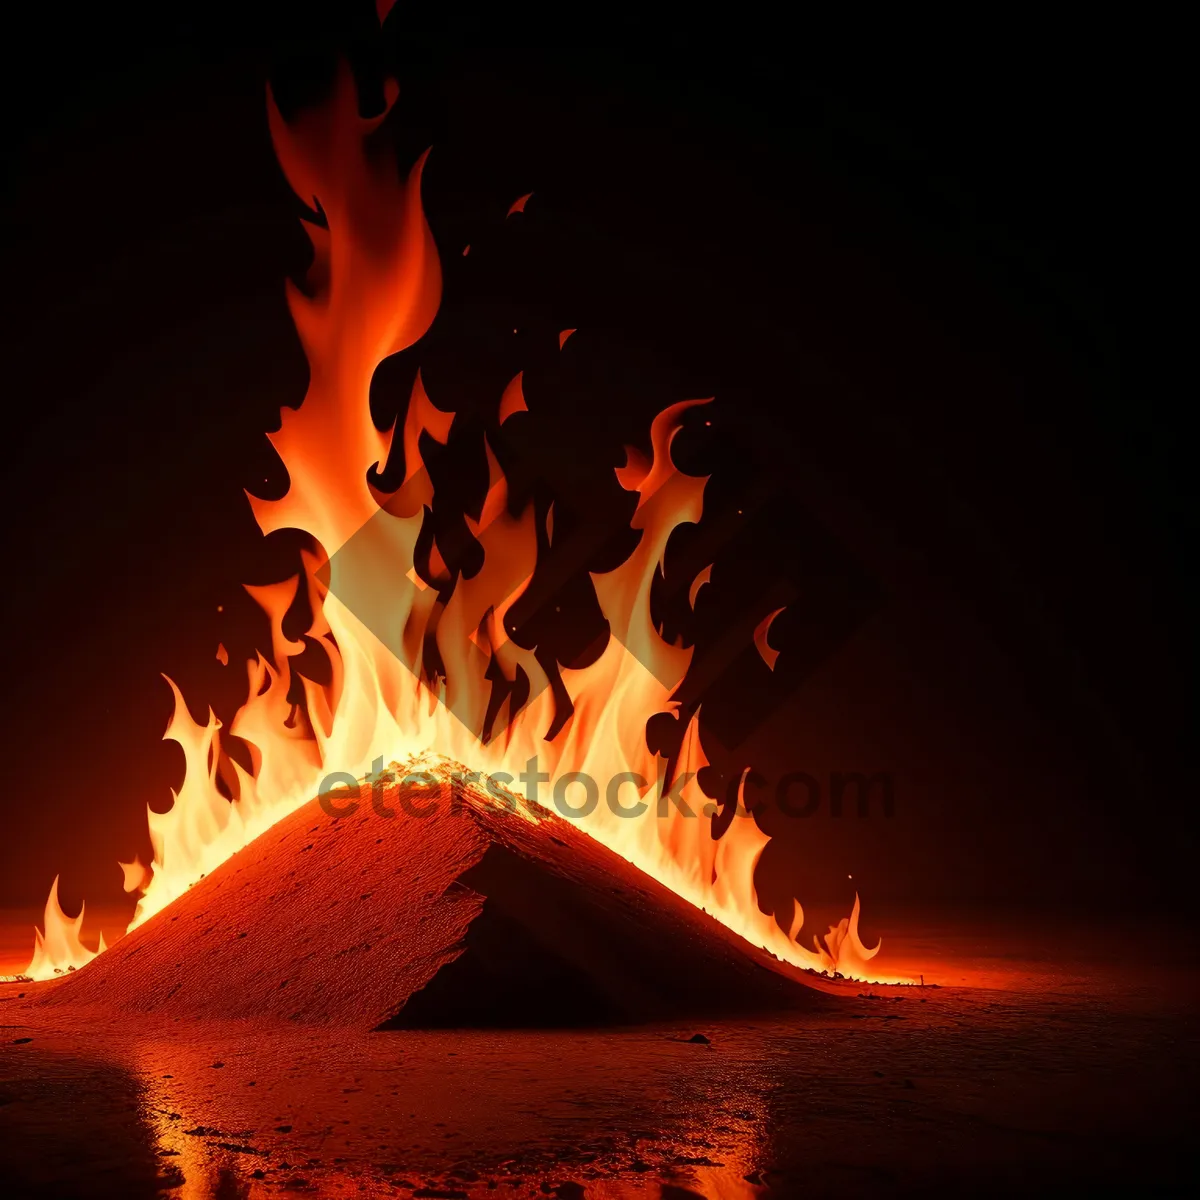 Picture of Fiery Blaze: Intense Heat and Burning Flames